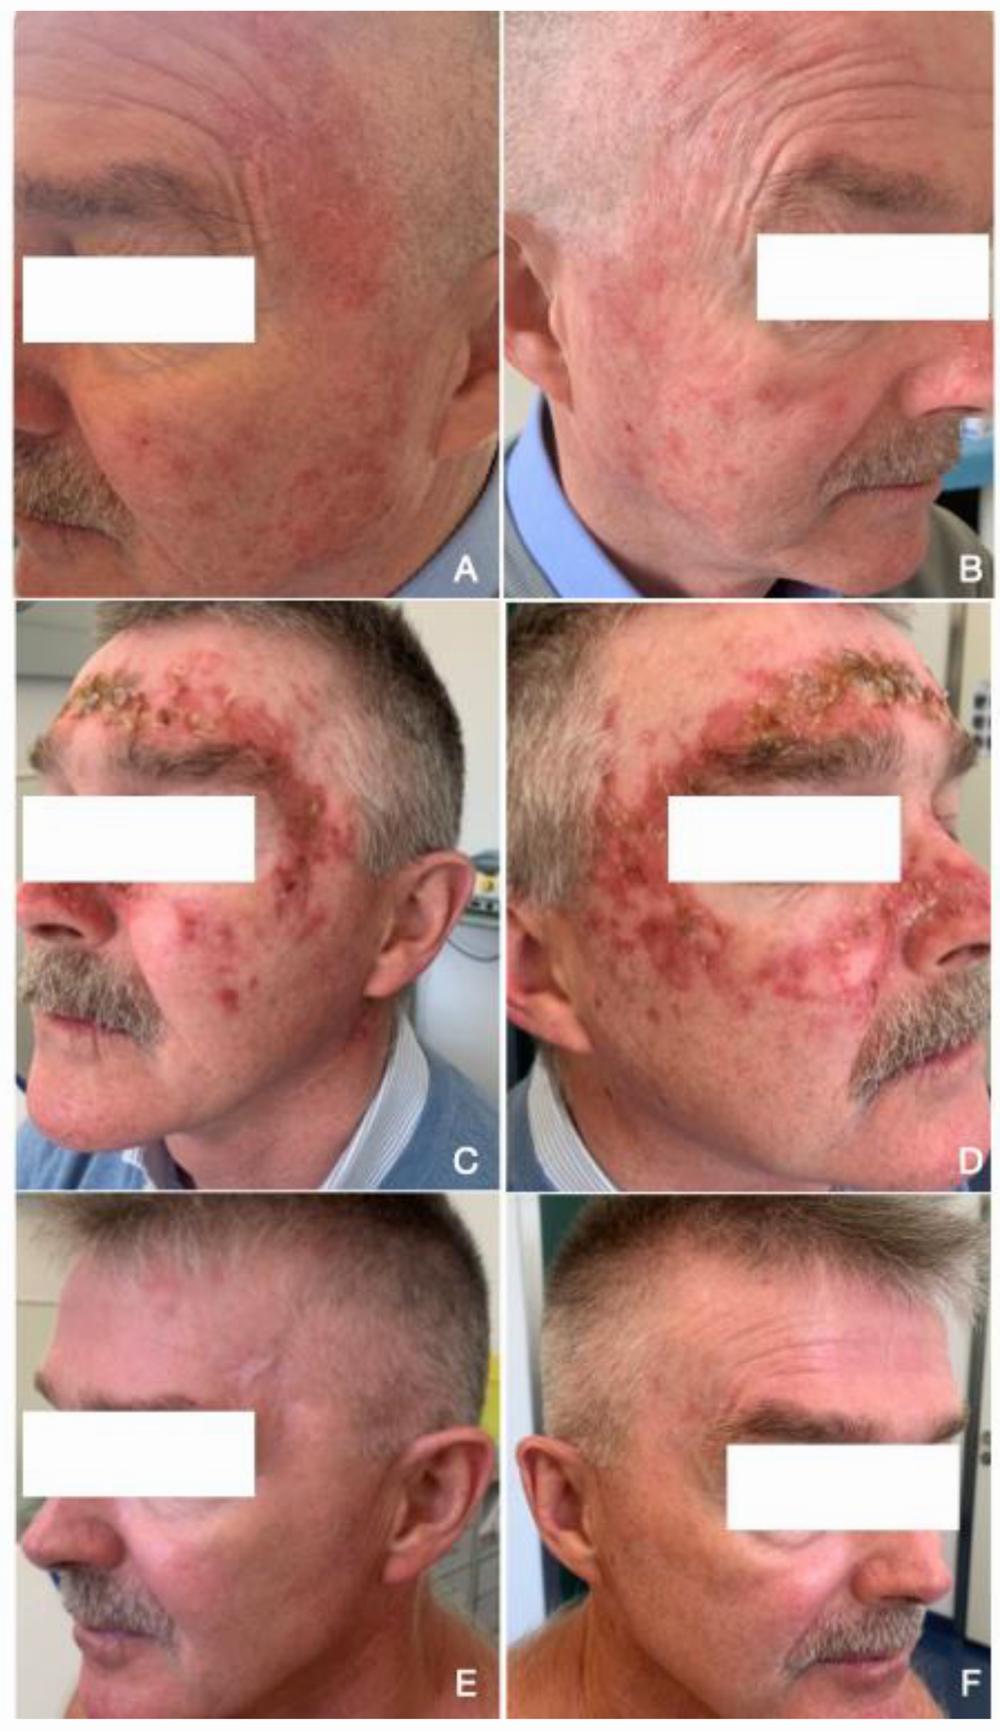 A 64-year-old man with a history of actinic keratosis who presented with multiple erythematous scaly patches on his face.